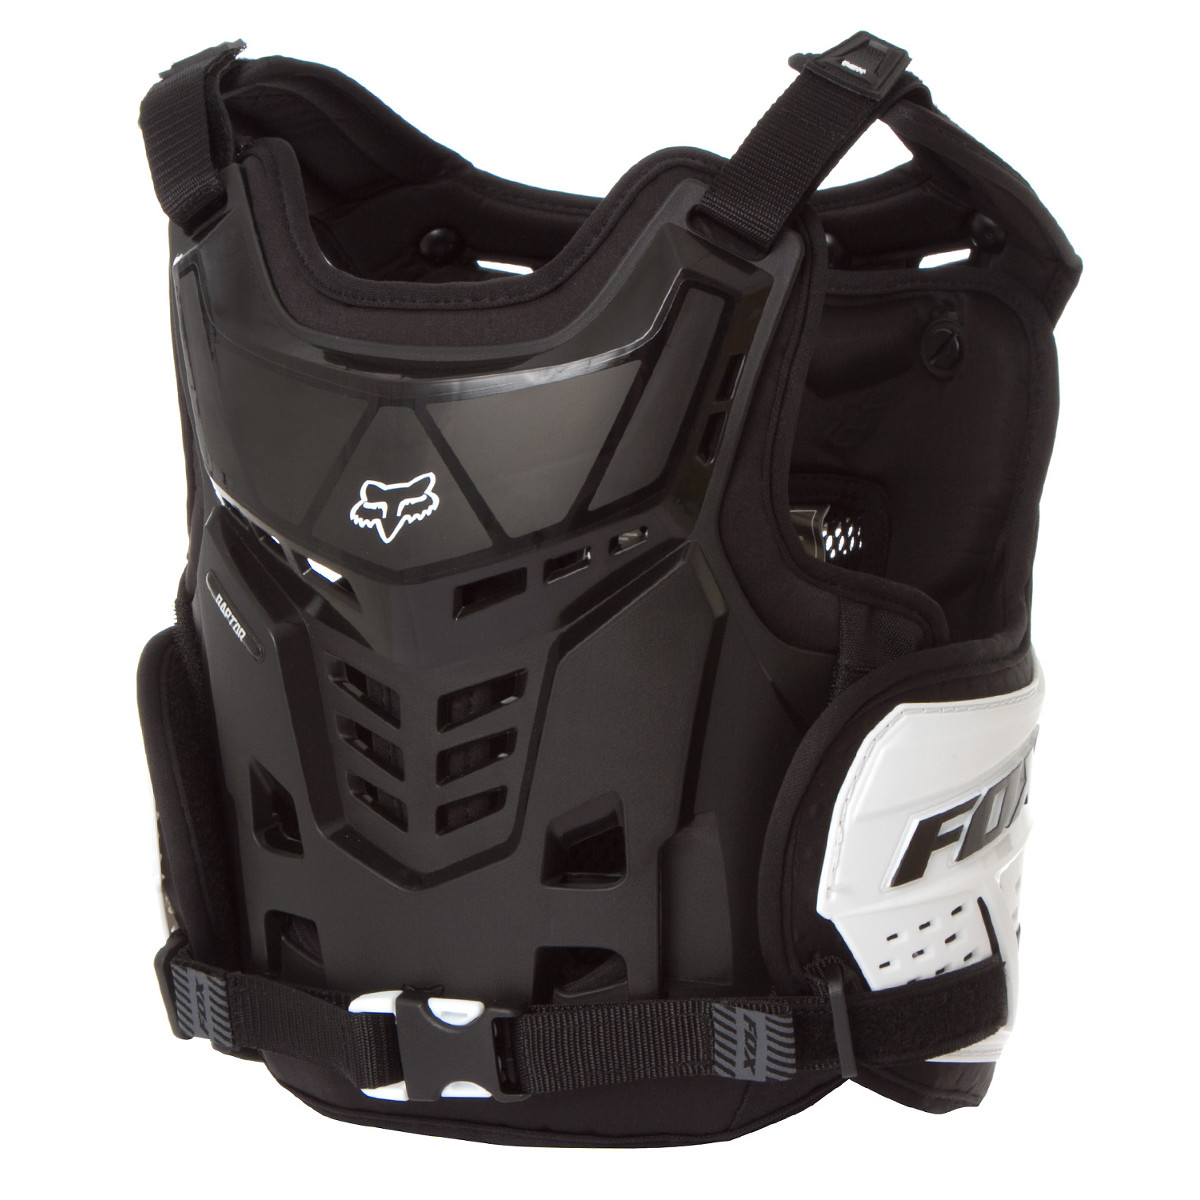 off road chest protector